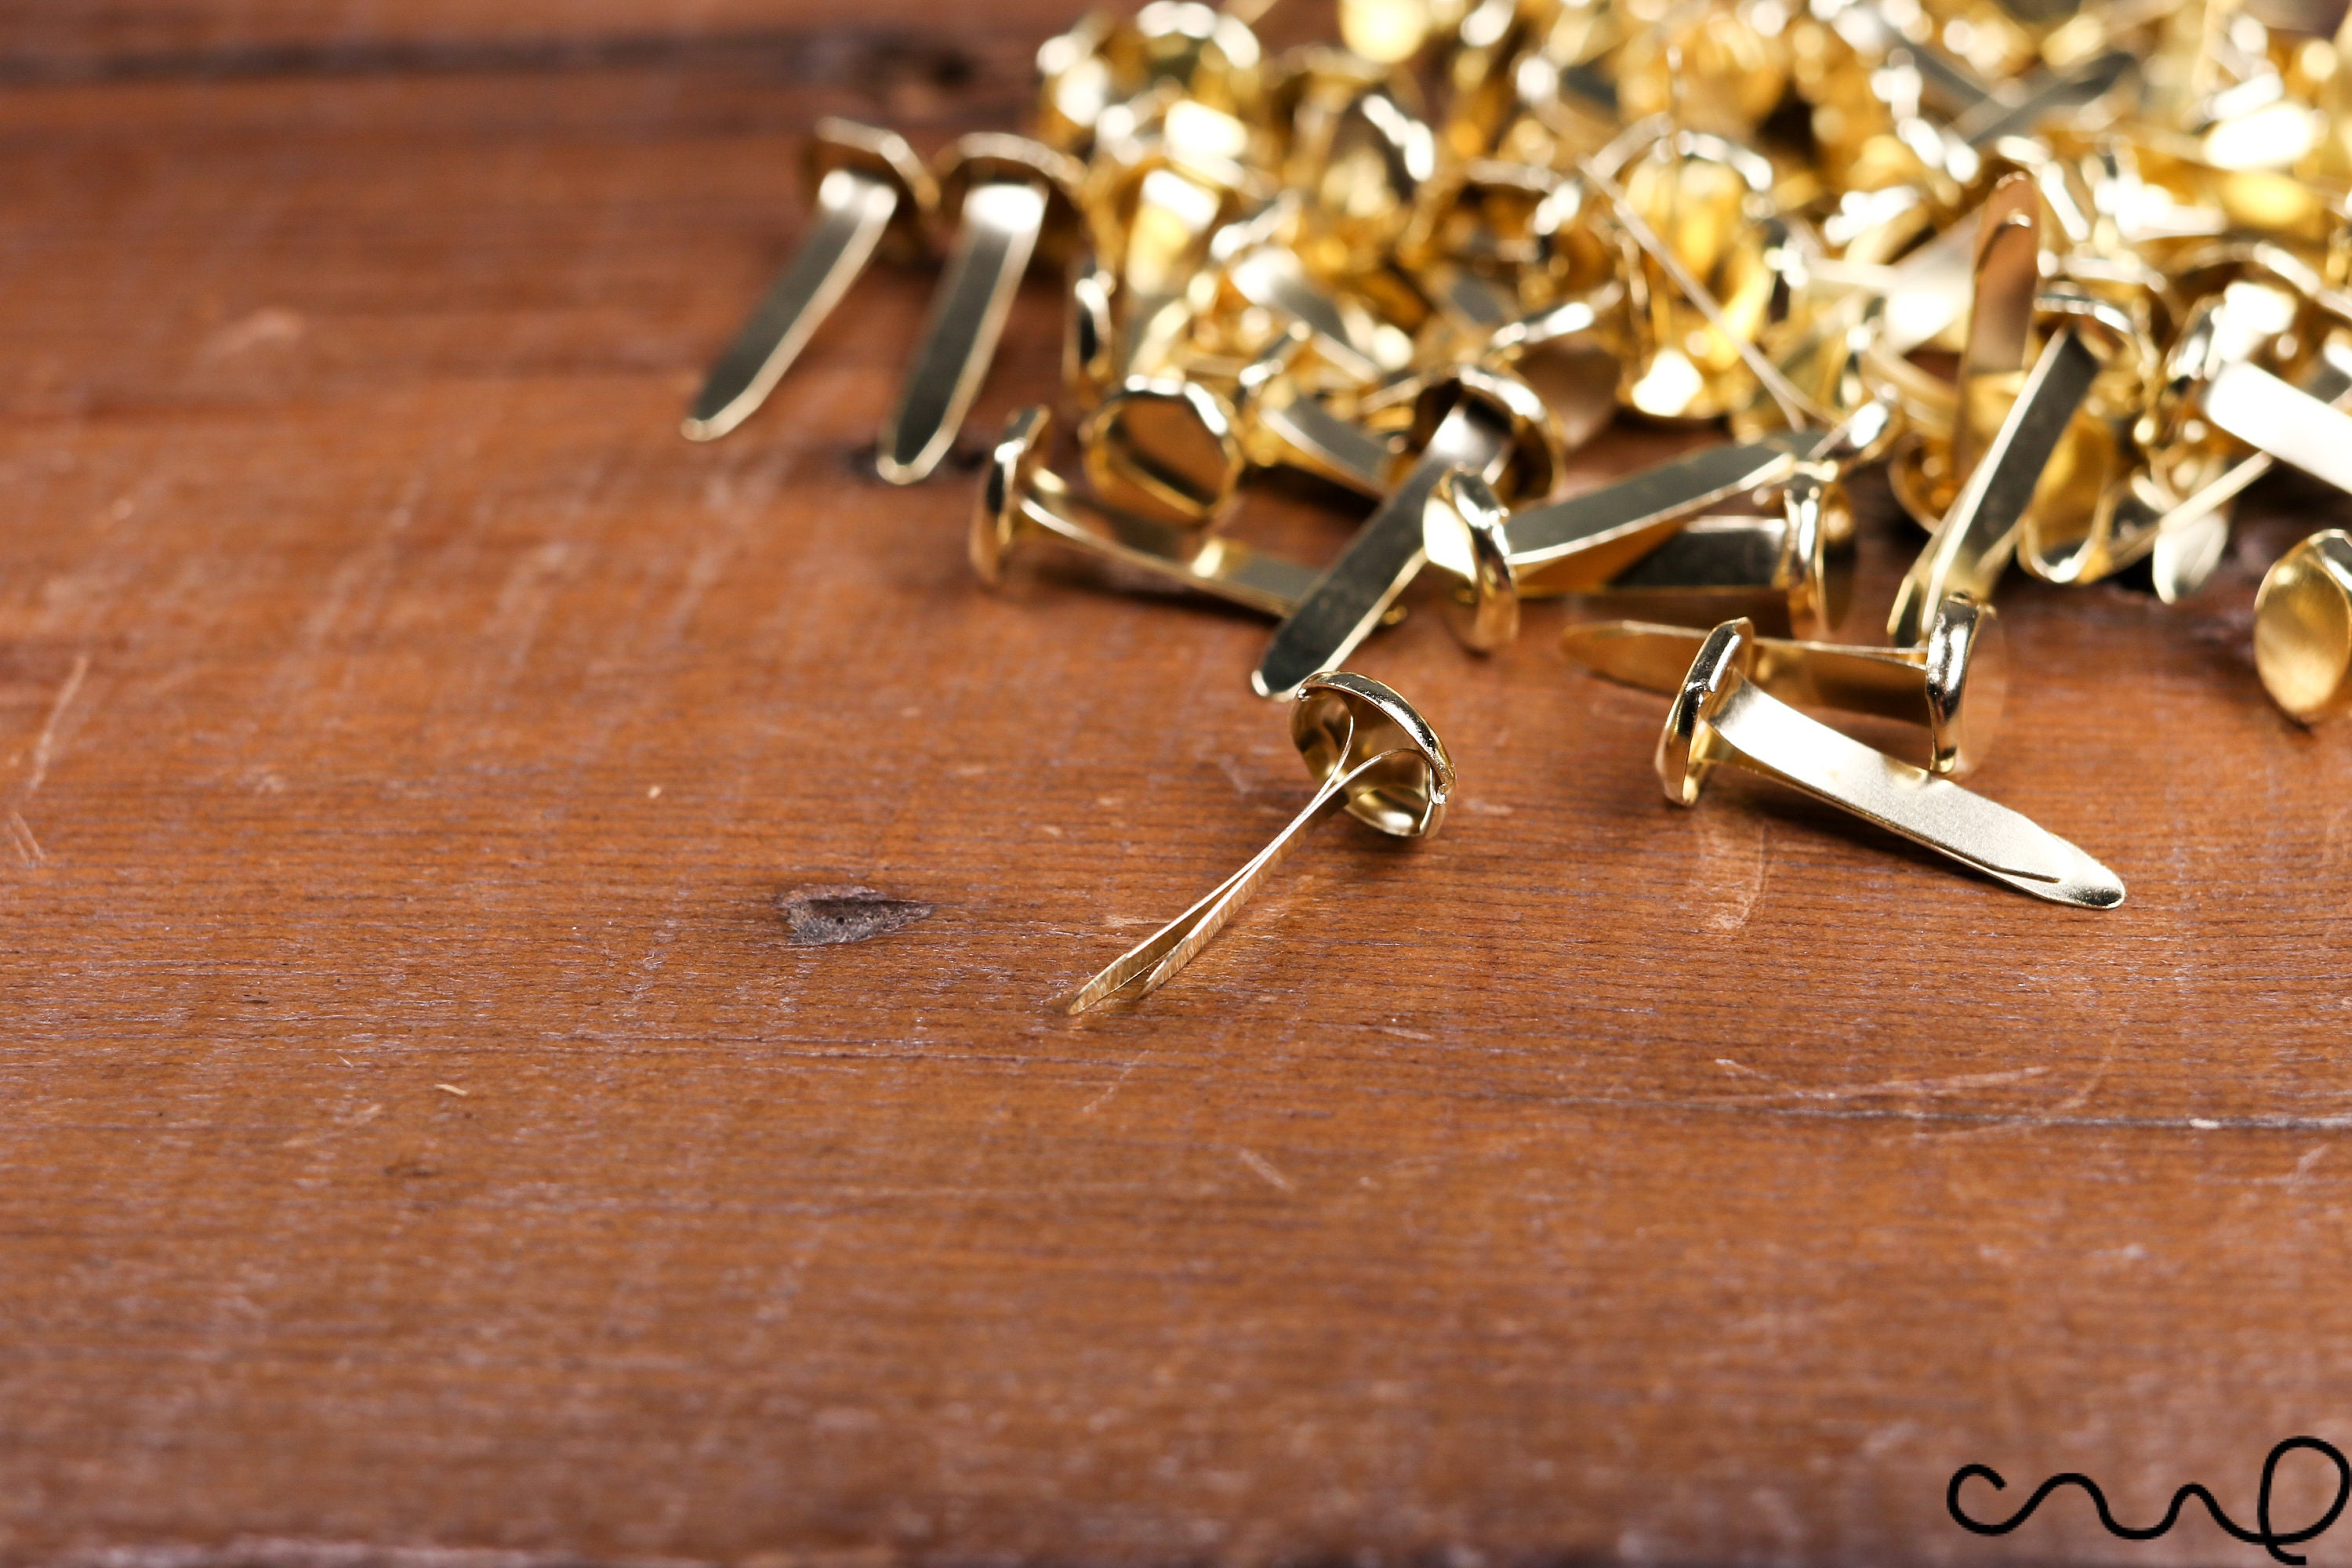 Gold Paper Fasteners - 19mm, Hobby Lobby